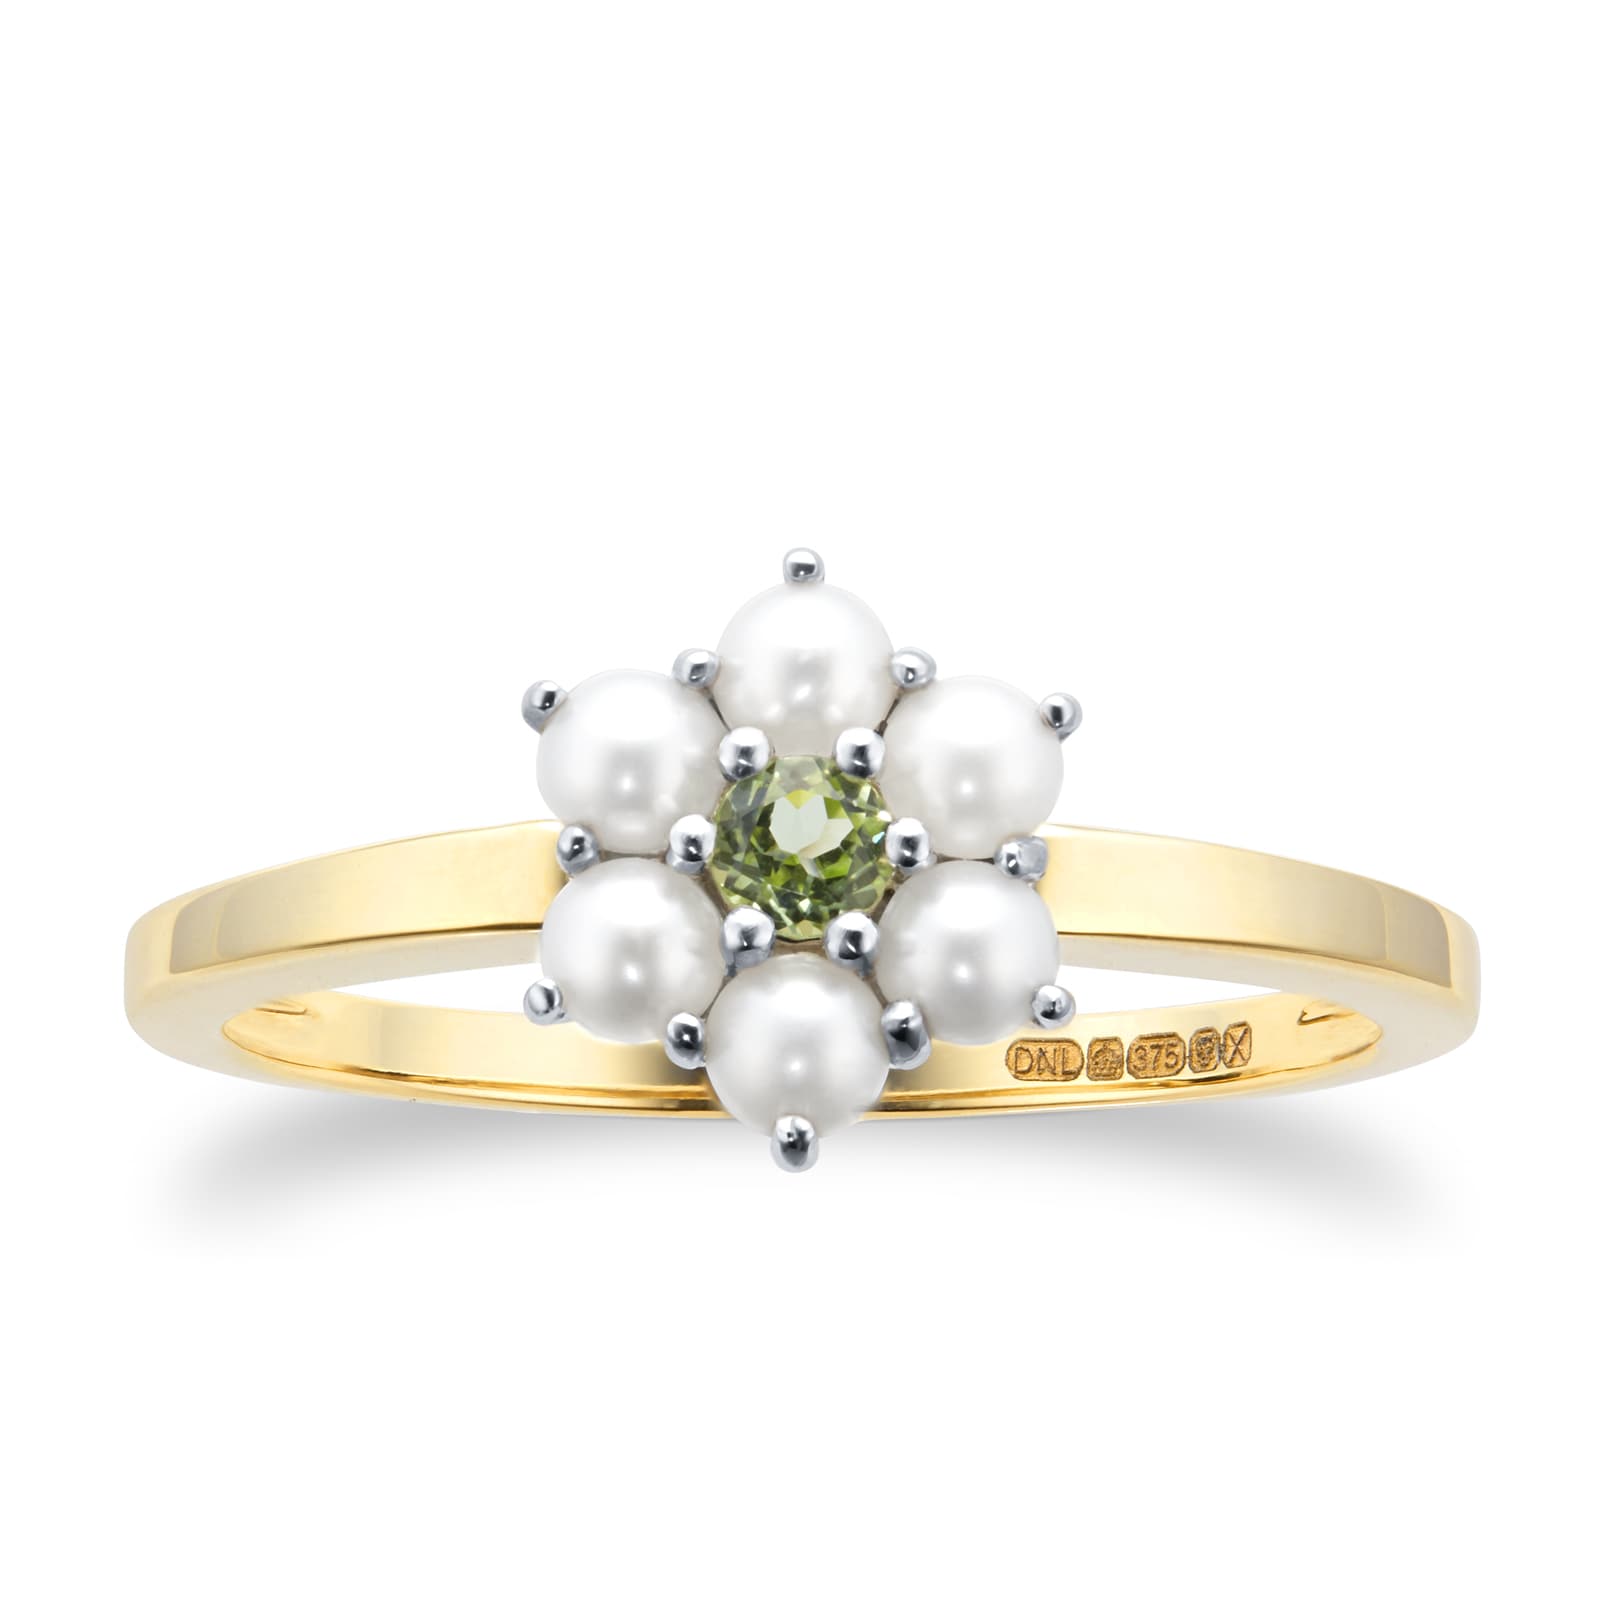 9ct Yellow & White Gold Peridot & Fresh Water Pearl 7 Stone Daisy Cluster Ring - Ring Size M.5